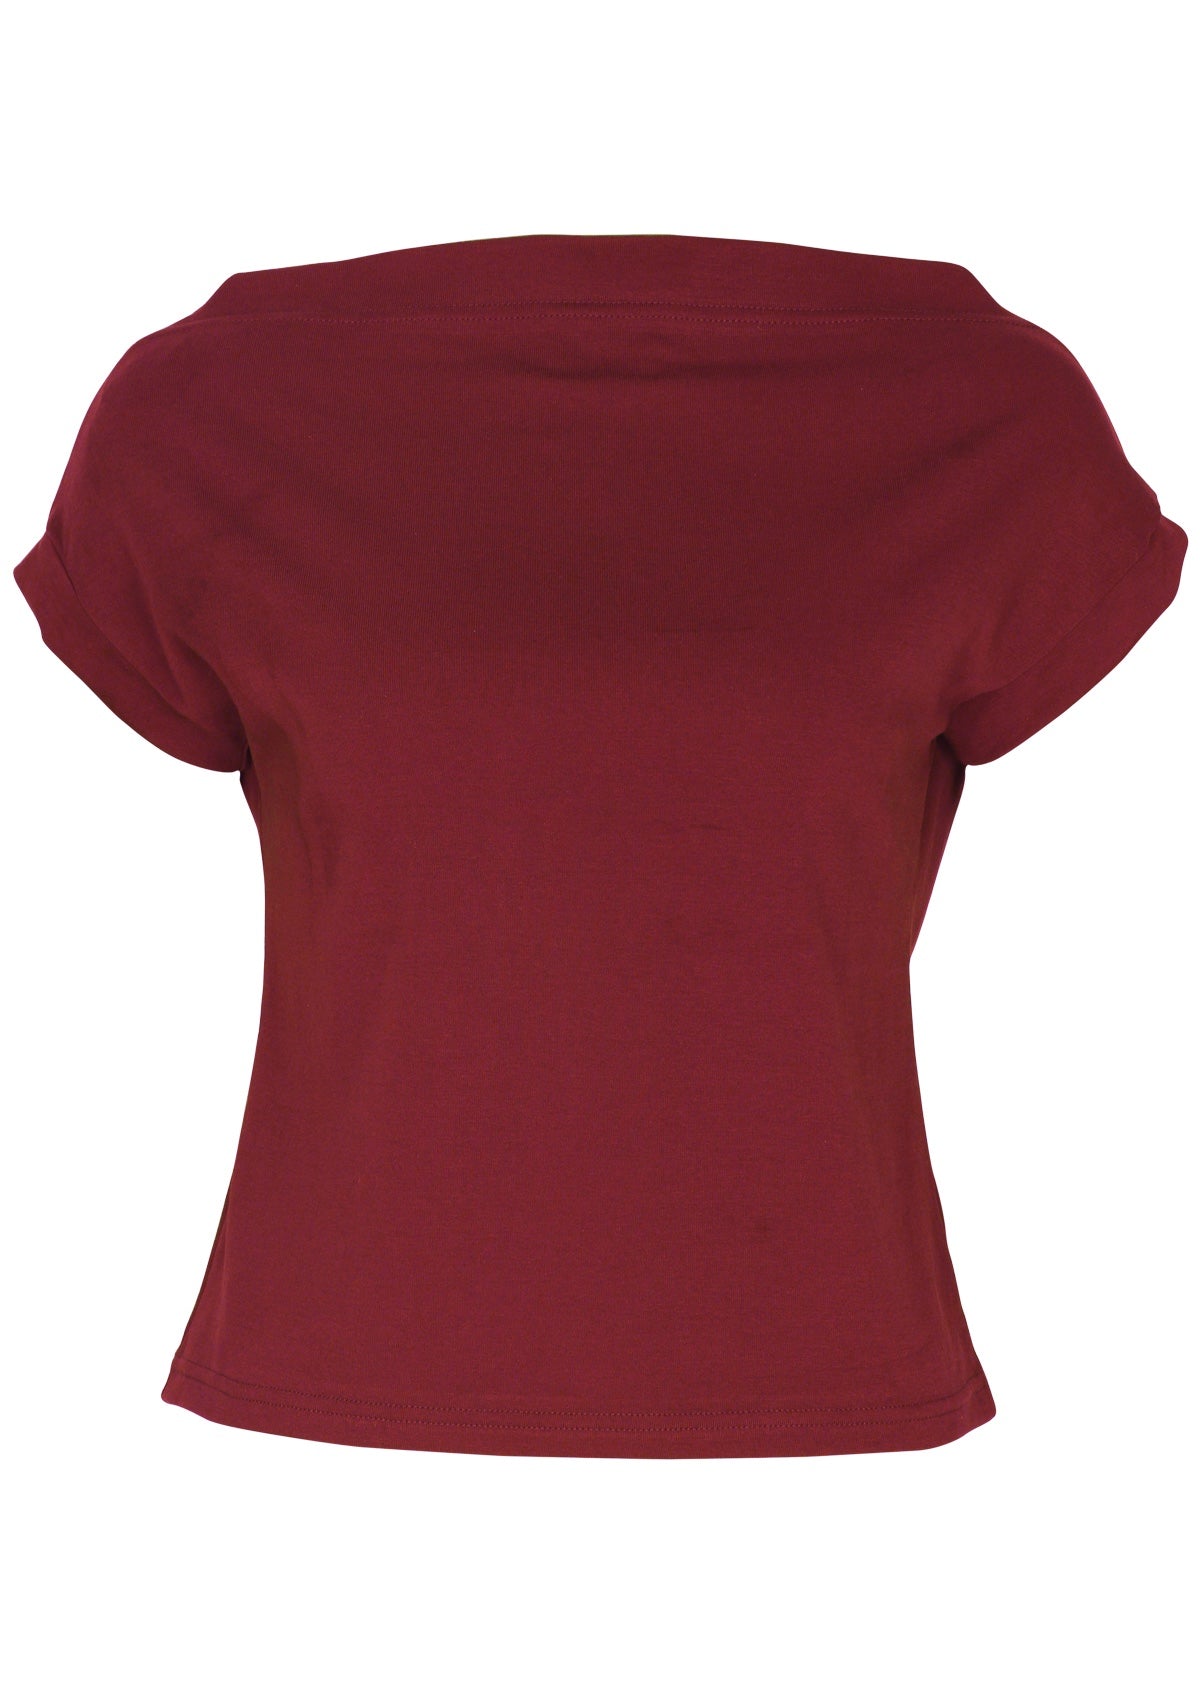 Front view of a women's wide neck mod maroon stretch rayon boat neck top